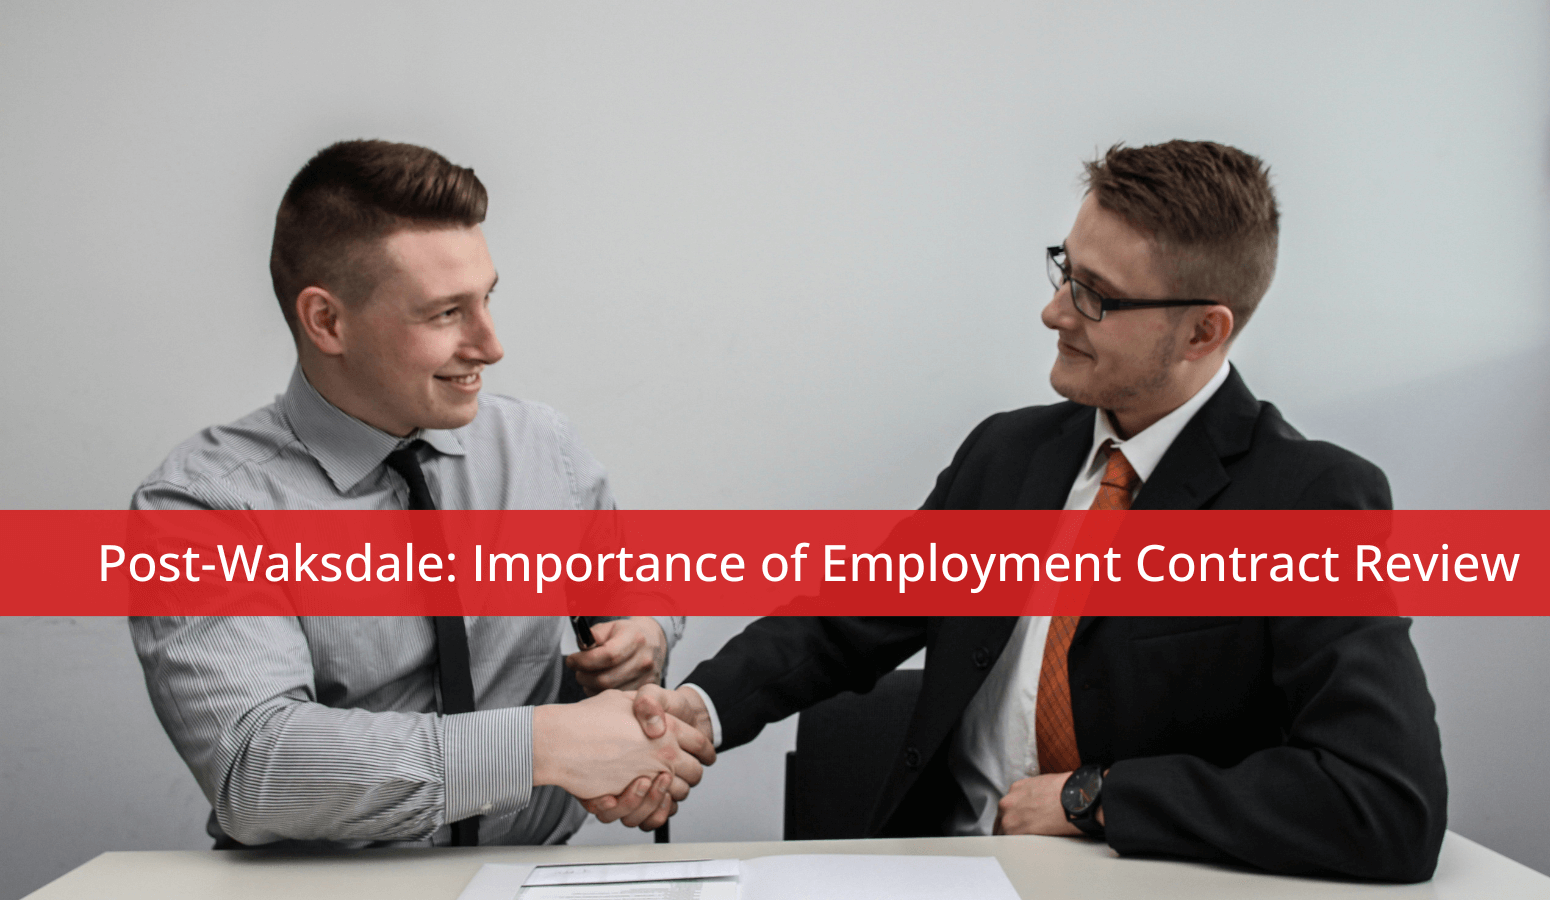 Featured image for “Post-Waksdale: Importance of Employment Contract Review”